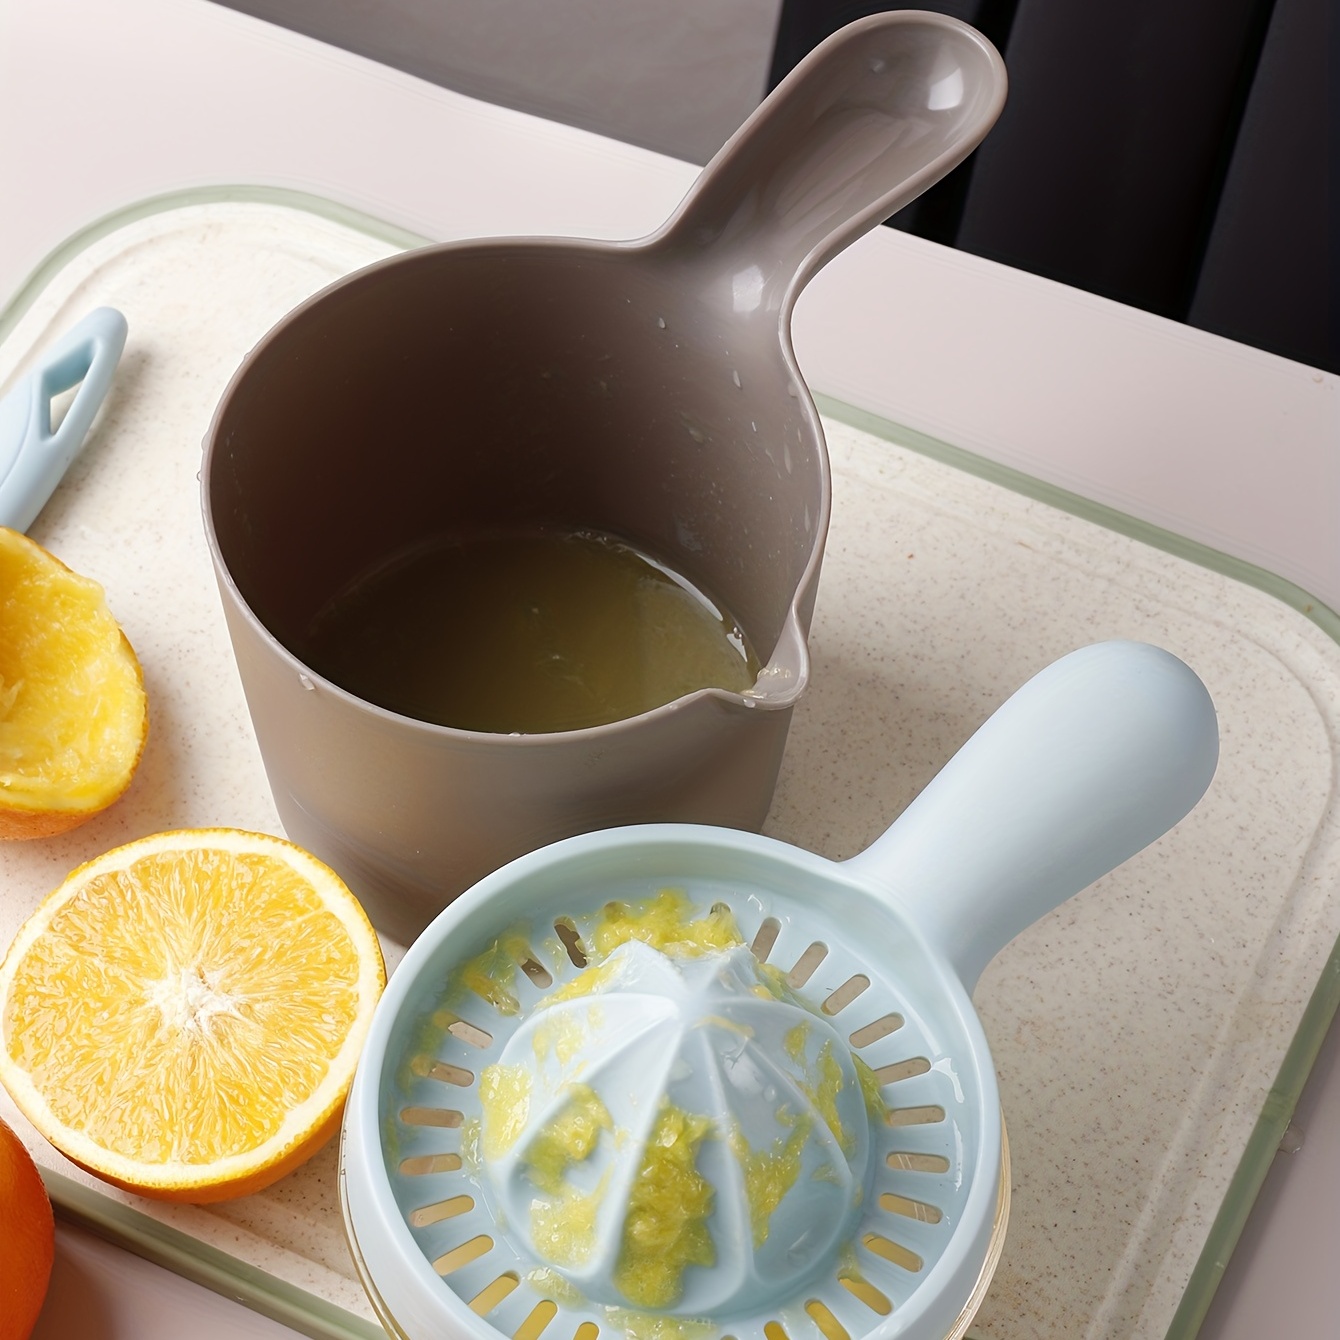 This Arthritis Friendly Citrus Juicer Allows Me To Juice the